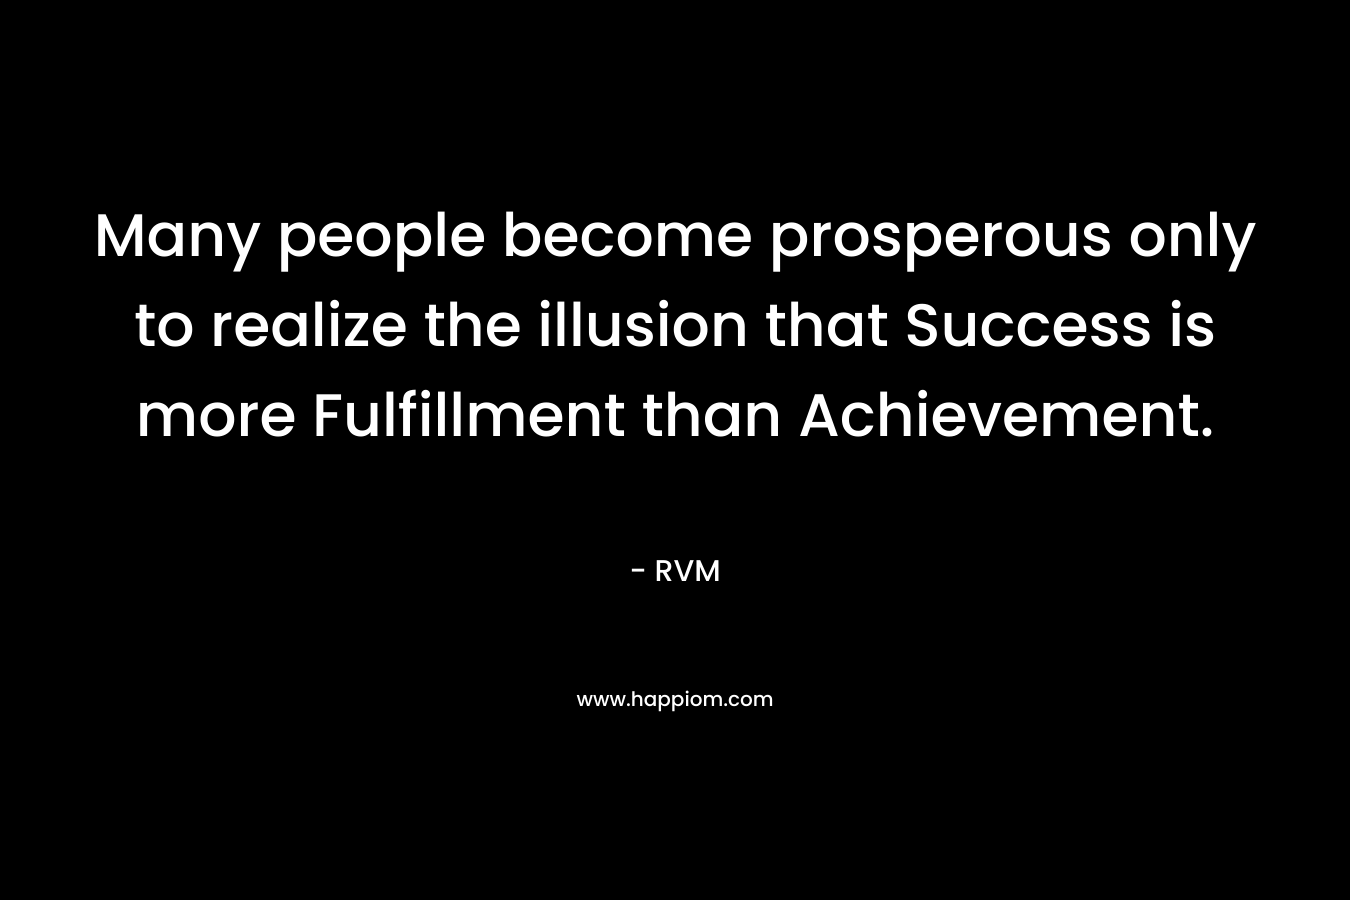 Many people become prosperous only to realize the illusion that Success is more Fulfillment than Achievement.